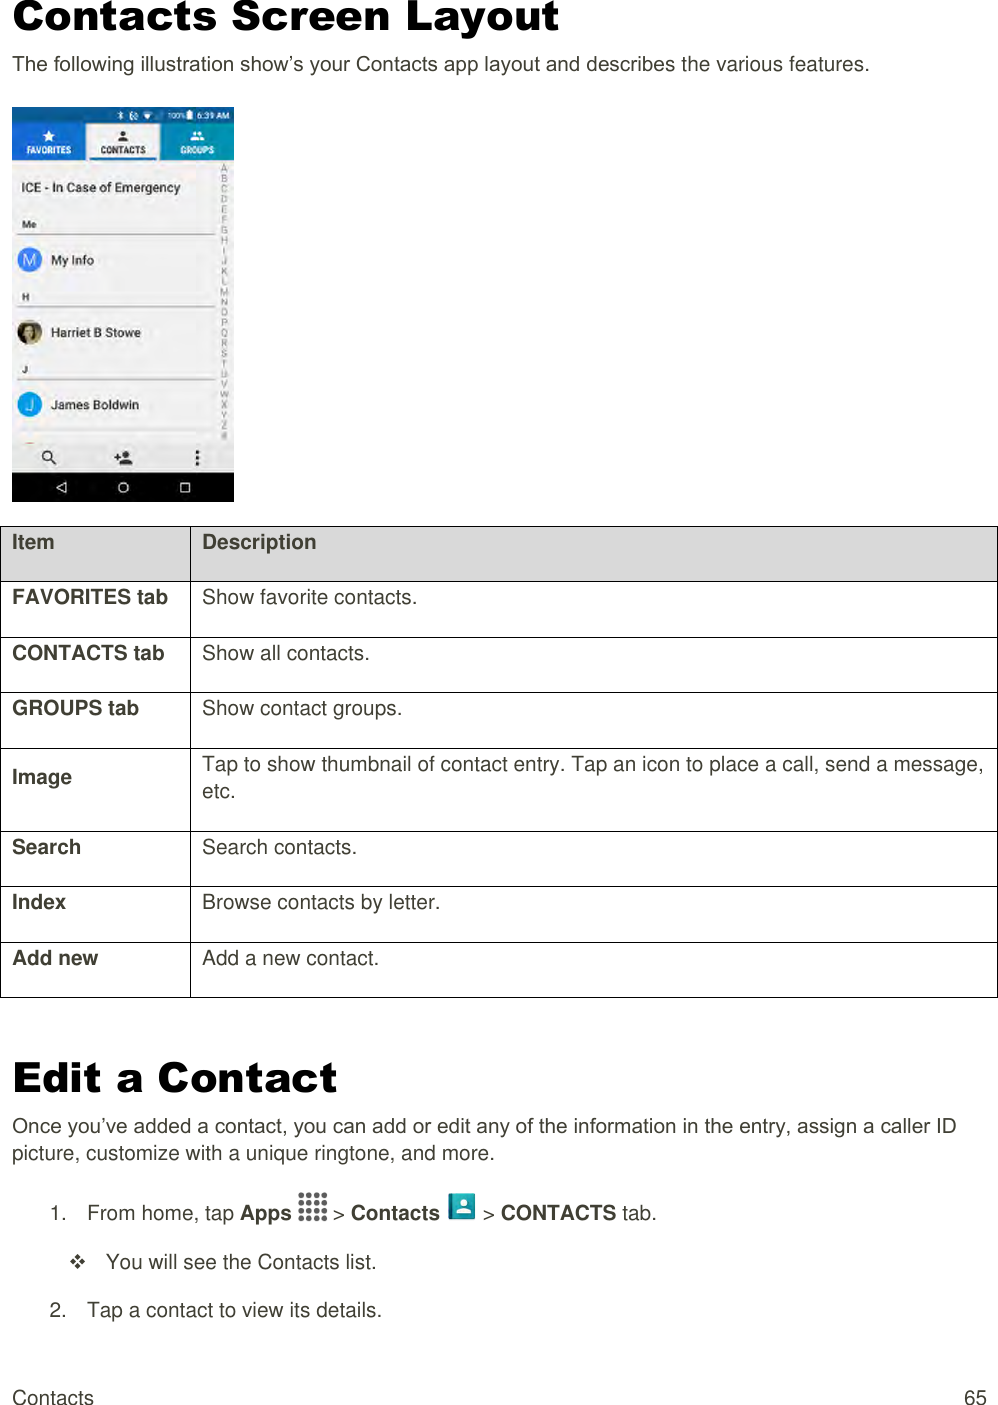 Contacts  65 Contacts Screen Layout The following illustration show’s your Contacts app layout and describes the various features.   Item Description FAVORITES tab Show favorite contacts. CONTACTS tab Show all contacts. GROUPS tab Show contact groups. Image Tap to show thumbnail of contact entry. Tap an icon to place a call, send a message, etc.  Search Search contacts. Index Browse contacts by letter. Add new Add a new contact.  Edit a Contact Once you’ve added a contact, you can add or edit any of the information in the entry, assign a caller ID picture, customize with a unique ringtone, and more. 1.  From home, tap Apps   &gt; Contacts   &gt; CONTACTS tab.    You will see the Contacts list. 2.  Tap a contact to view its details.  